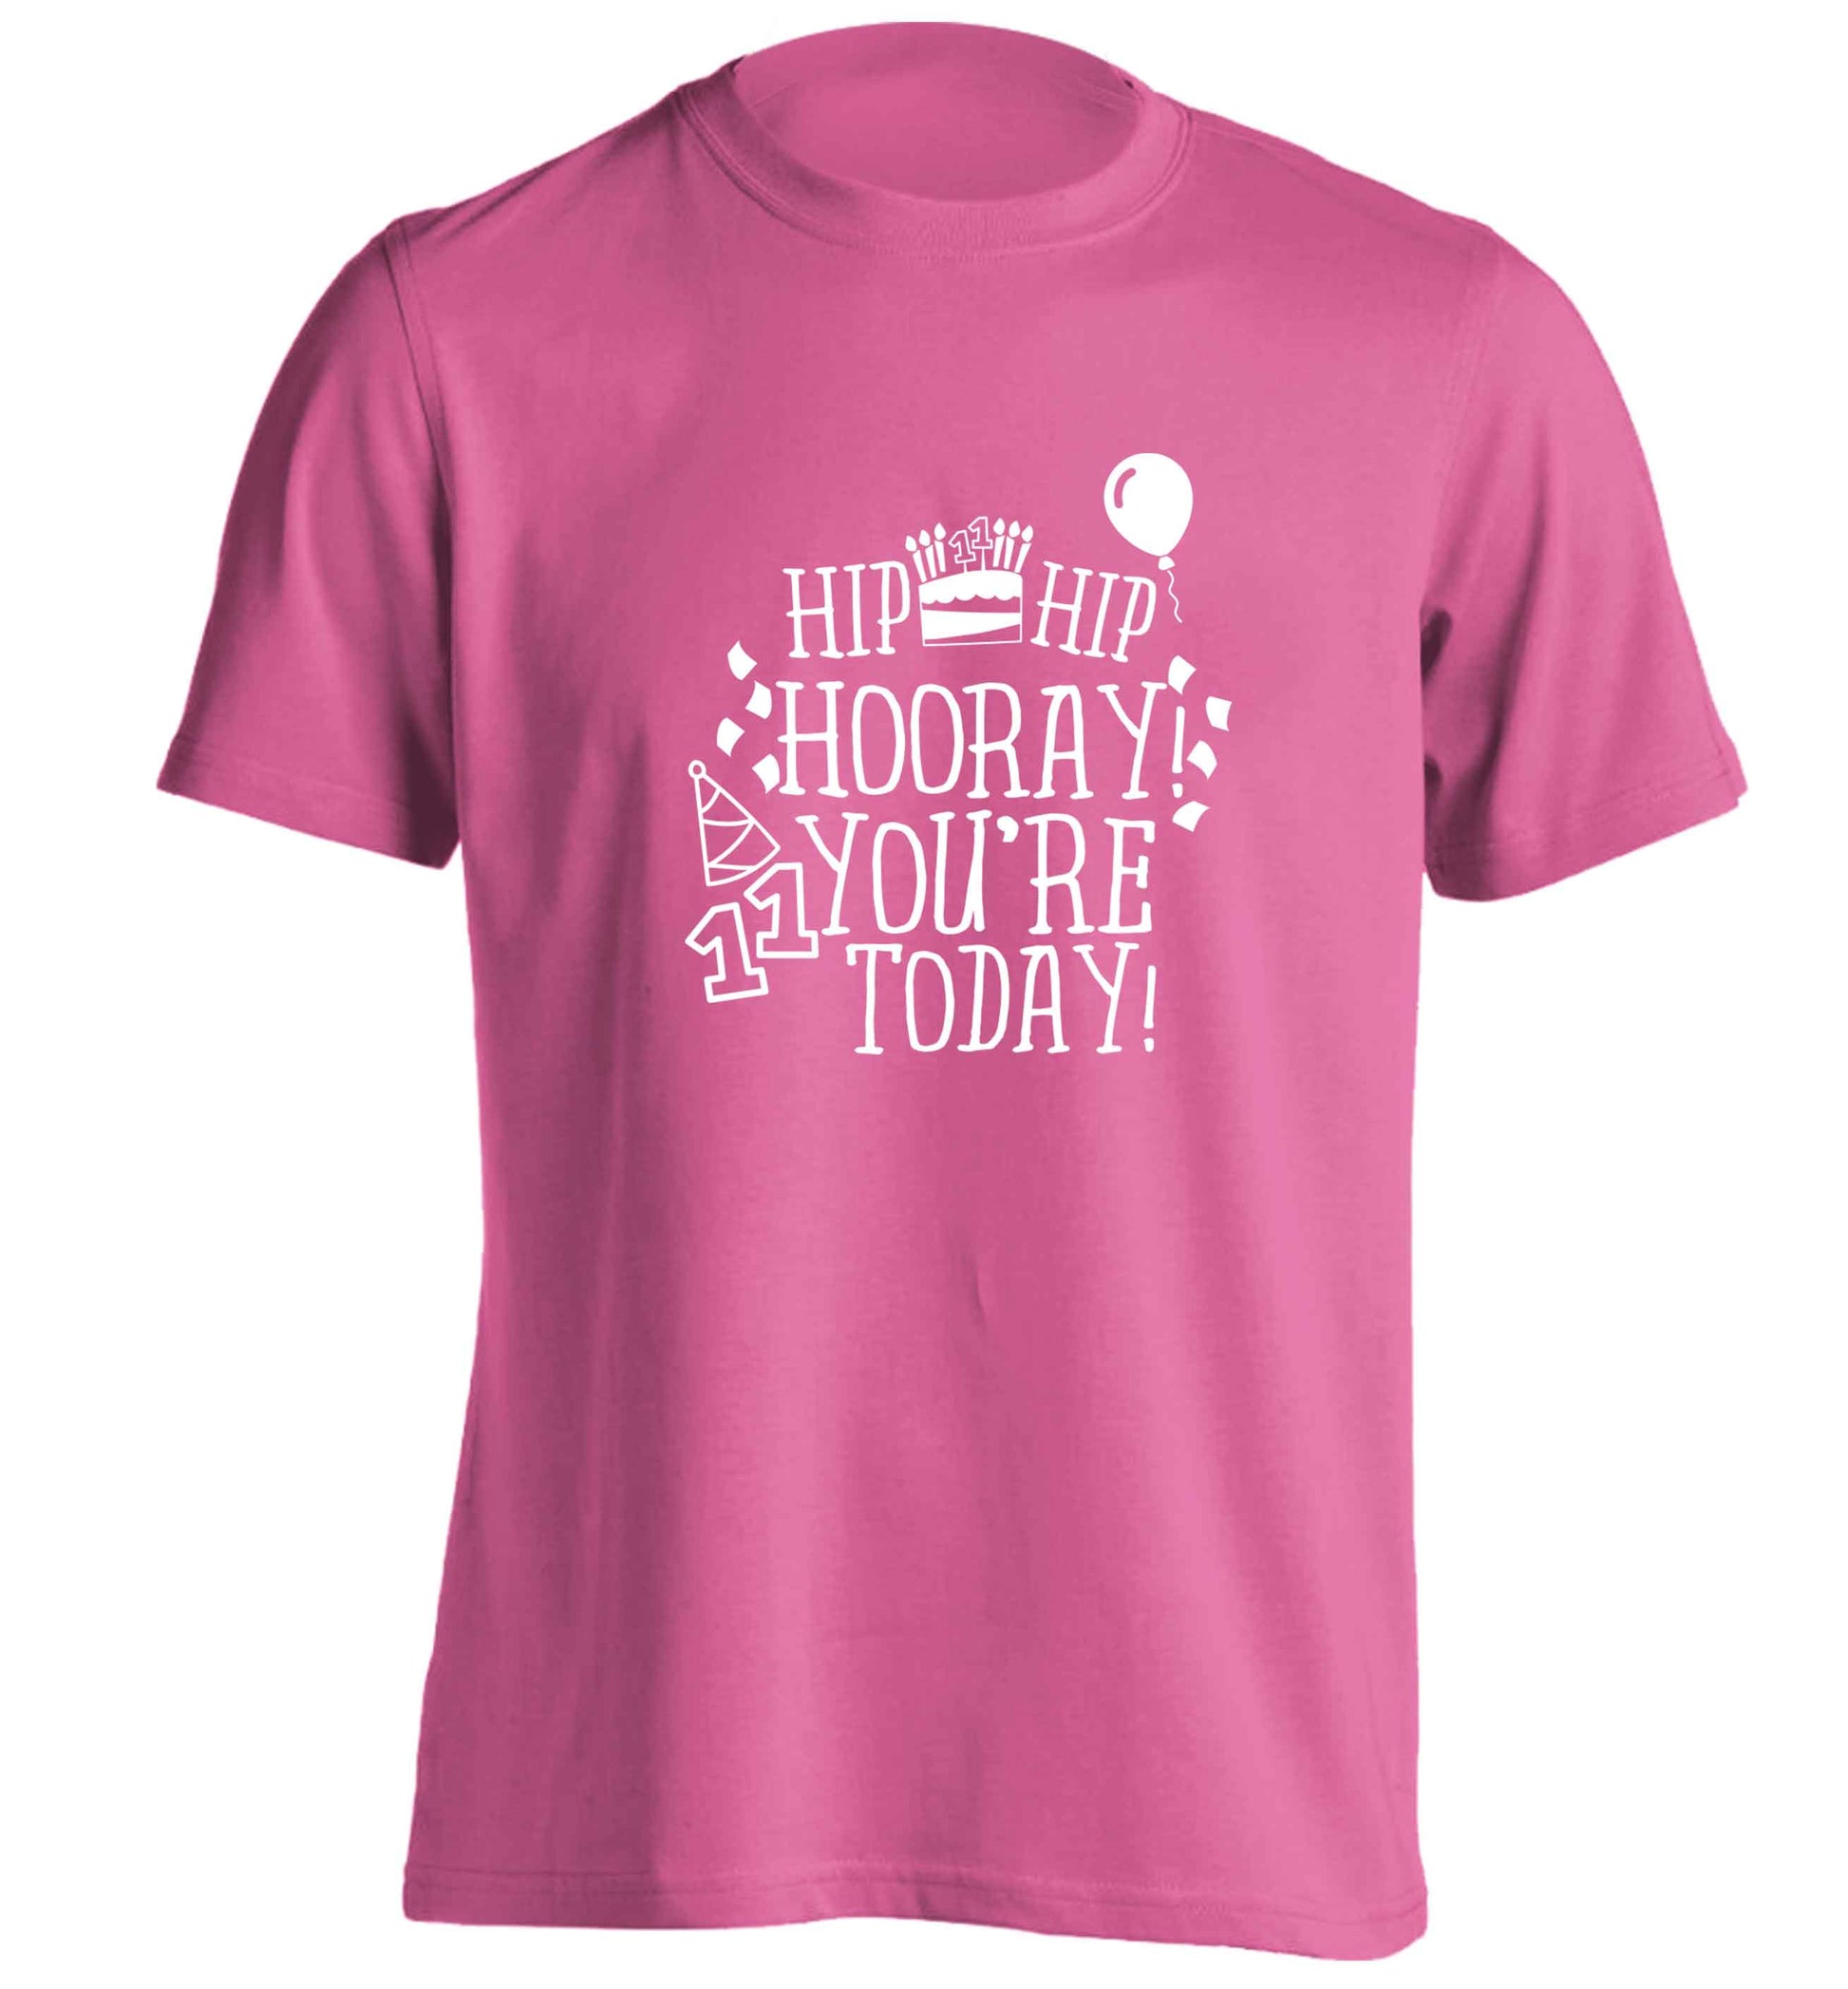 Hip hip hooray I you're eleven today! adults unisex pink Tshirt 2XL